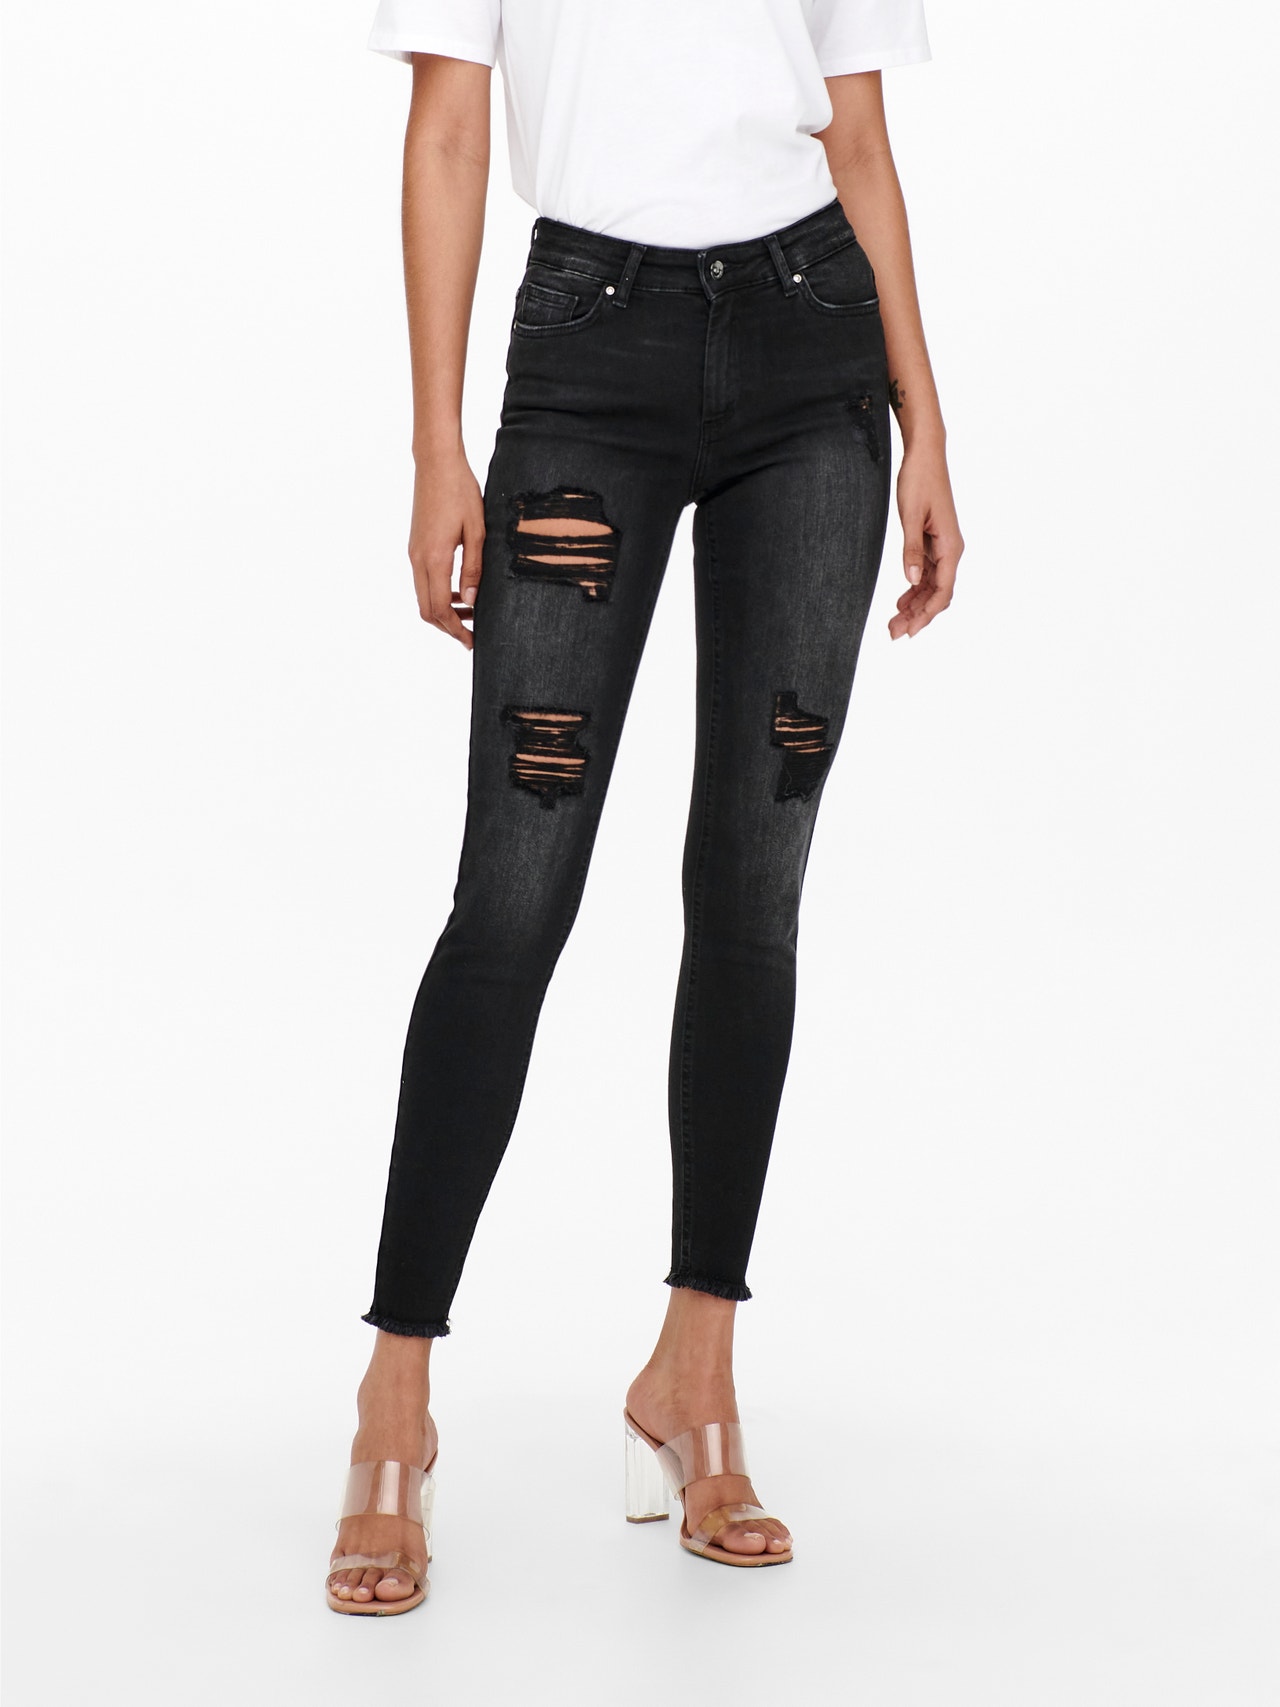 ONLY Skinny Fit Mid waist Jeans -Washed Black - 15233716